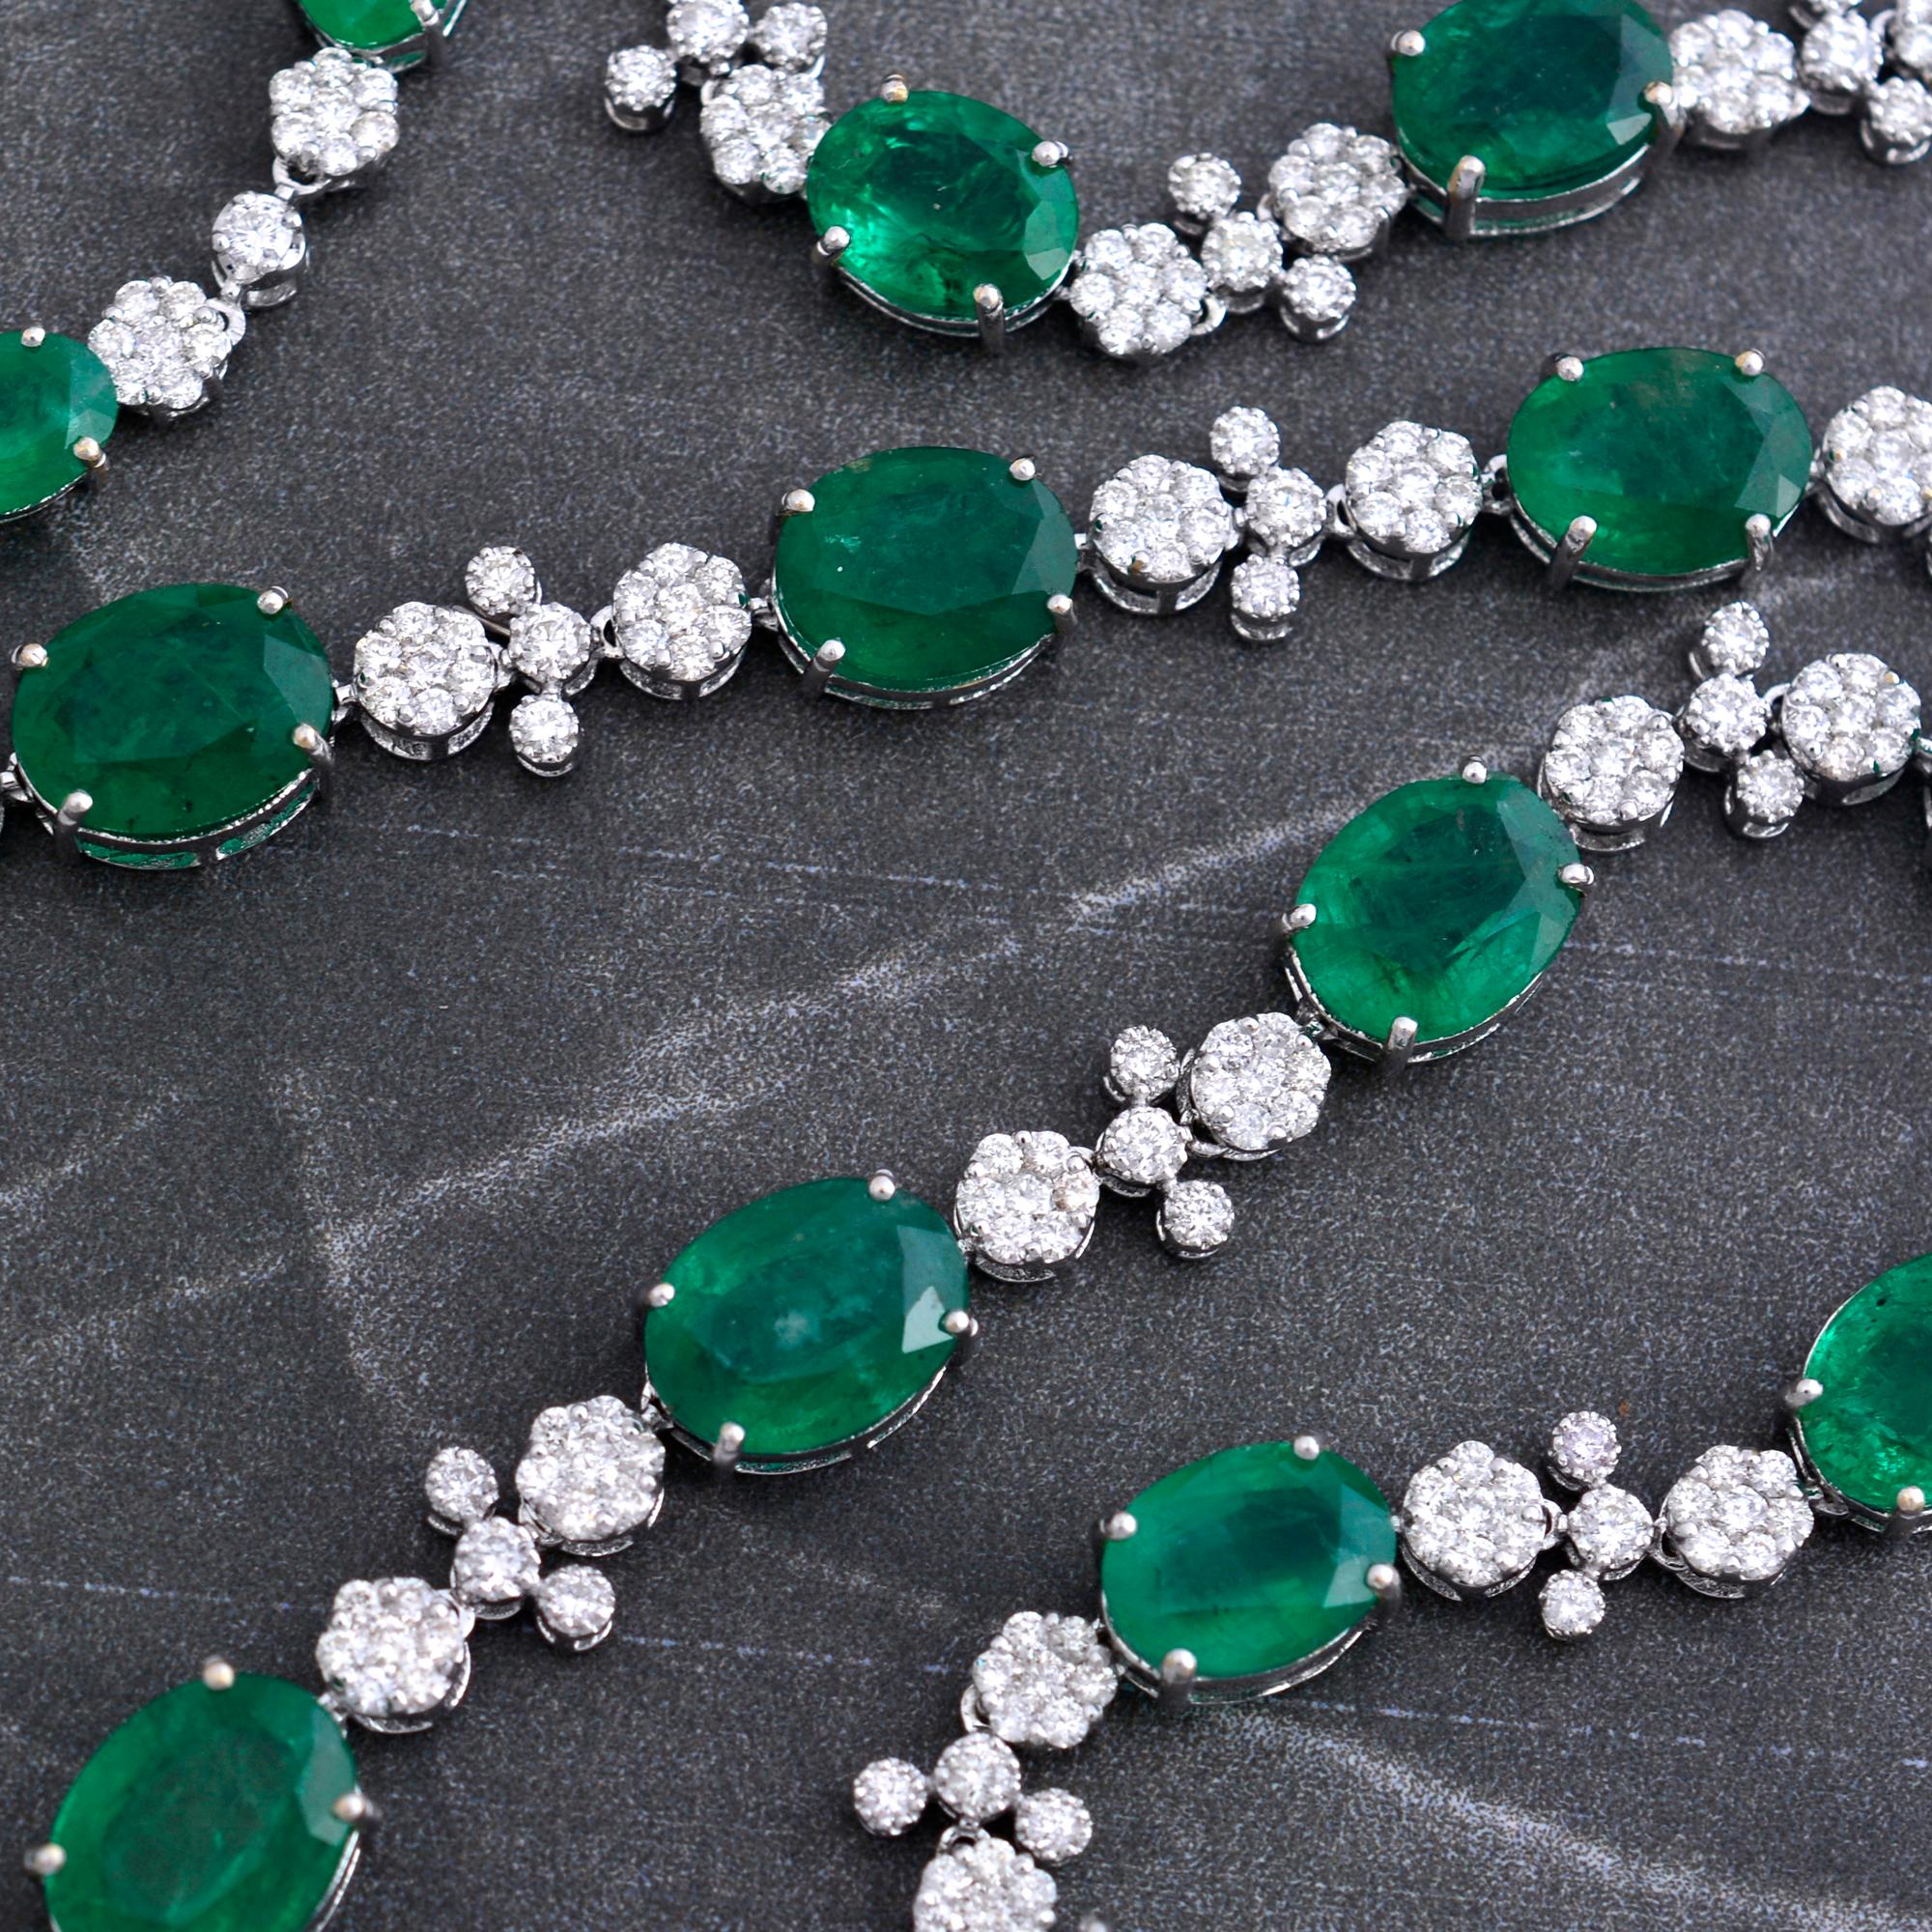 The necklace is meticulously handcrafted from 14 karat white gold, chosen for its luxurious appearance and durability. The white gold setting perfectly complements the emerald and diamonds, creating a harmonious blend of elegance and strength. The